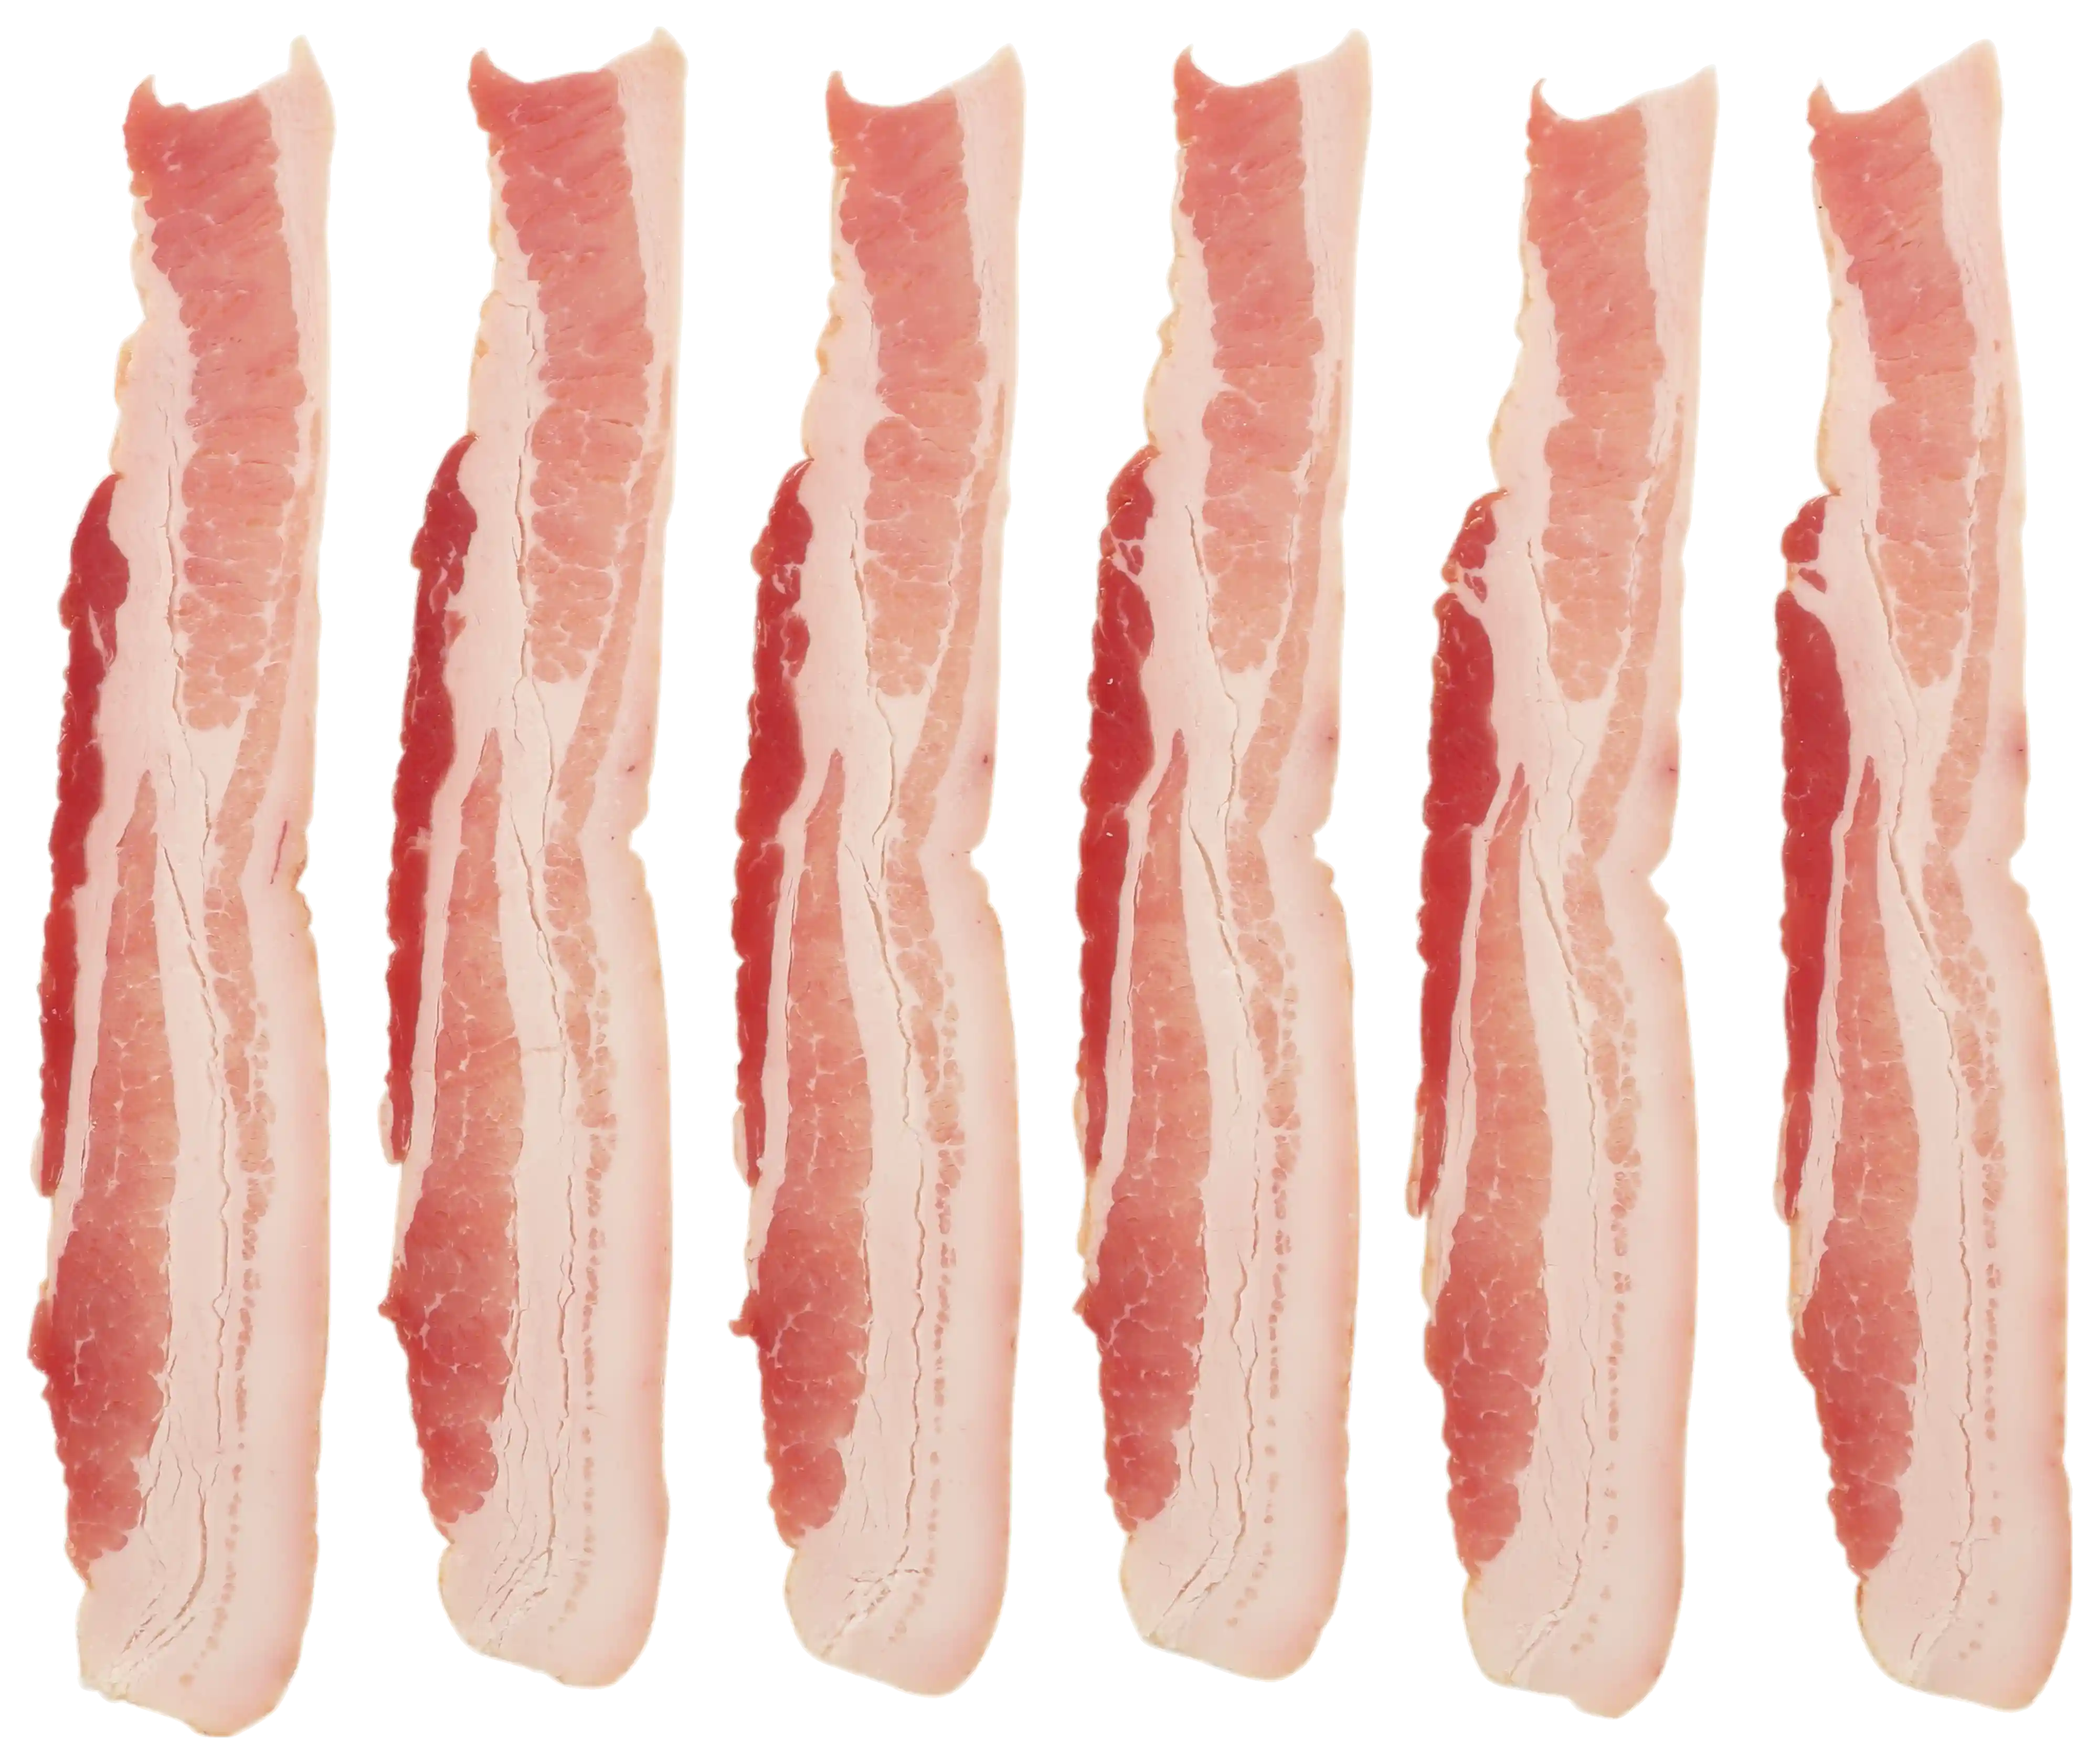 Wright® Brand Naturally Smoked Regular Sliced Bacon, Bulk, 30 Lbs, 14-18 Slices per Pound, Gas Flushed_image_11